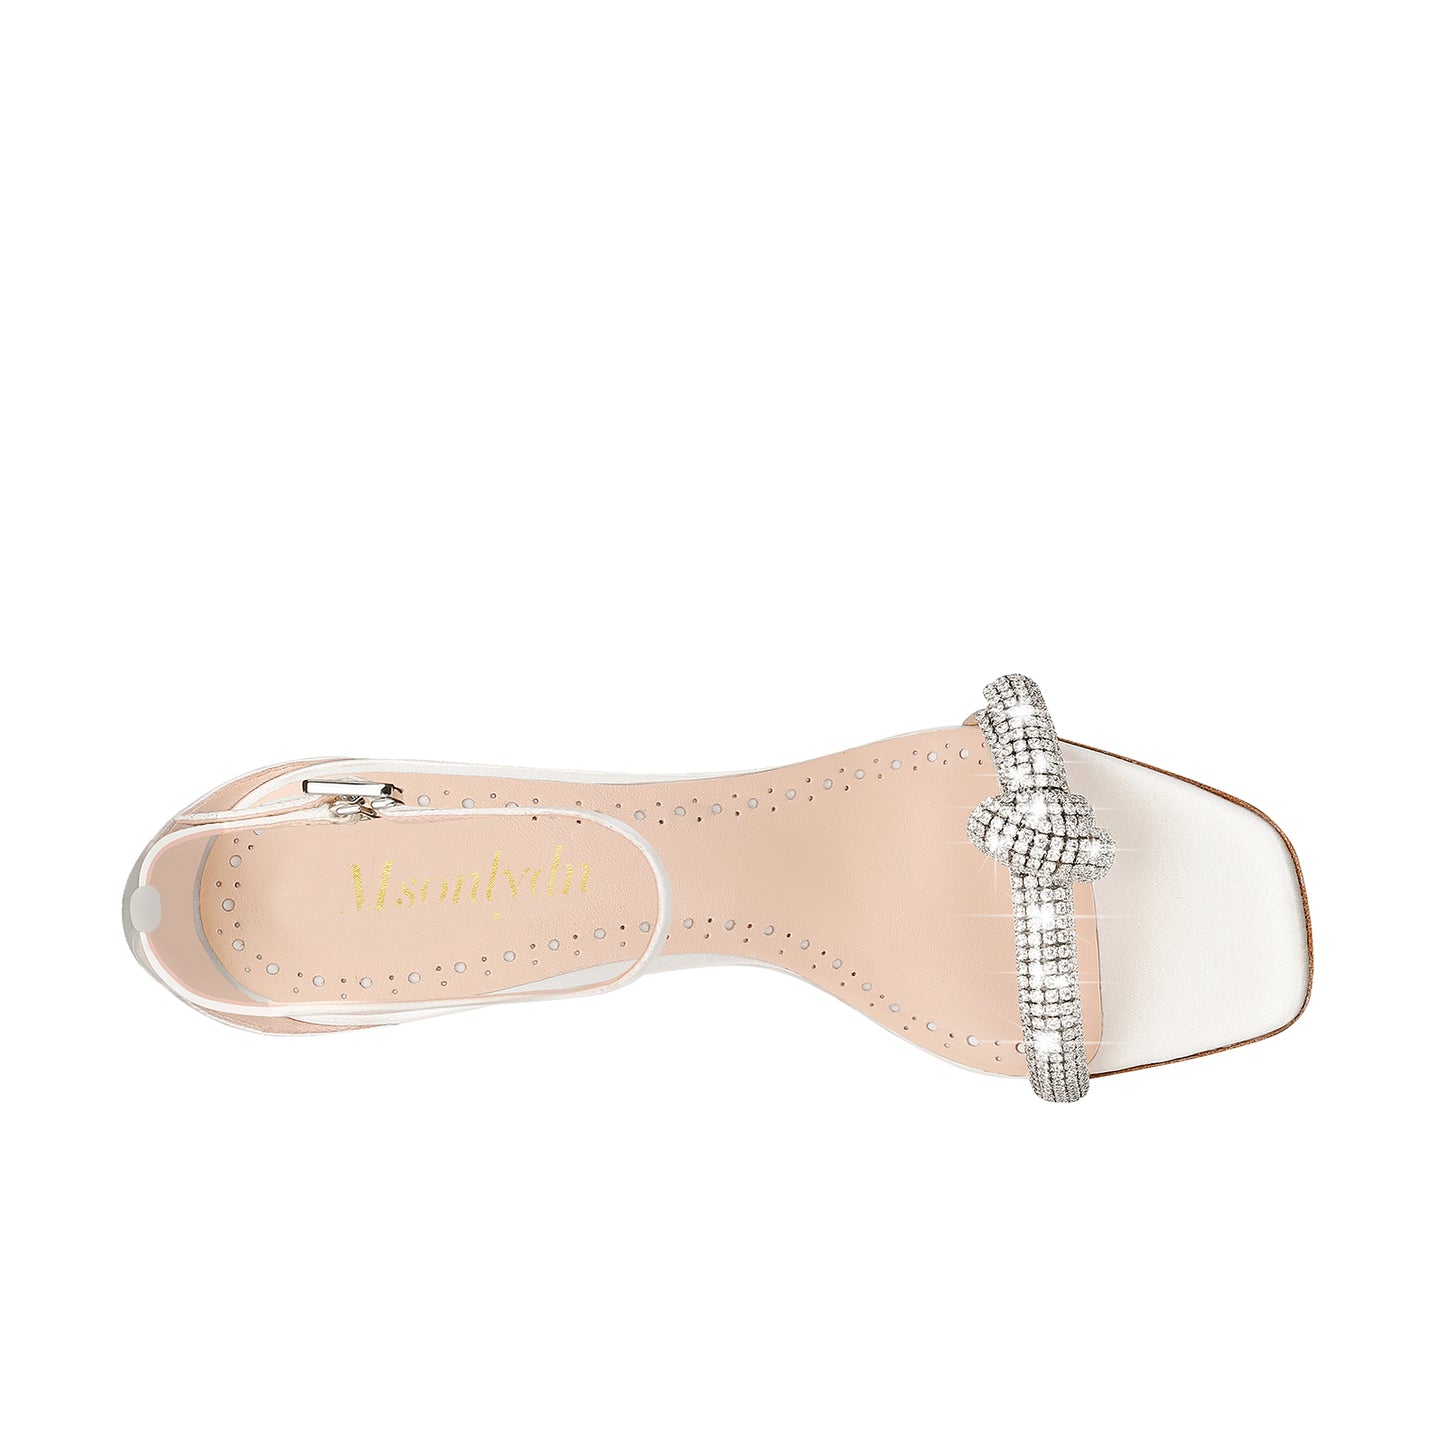 Women's Dressy Casual Diamond Square Toe Sandals with Thick Block Heel and Leather Strap